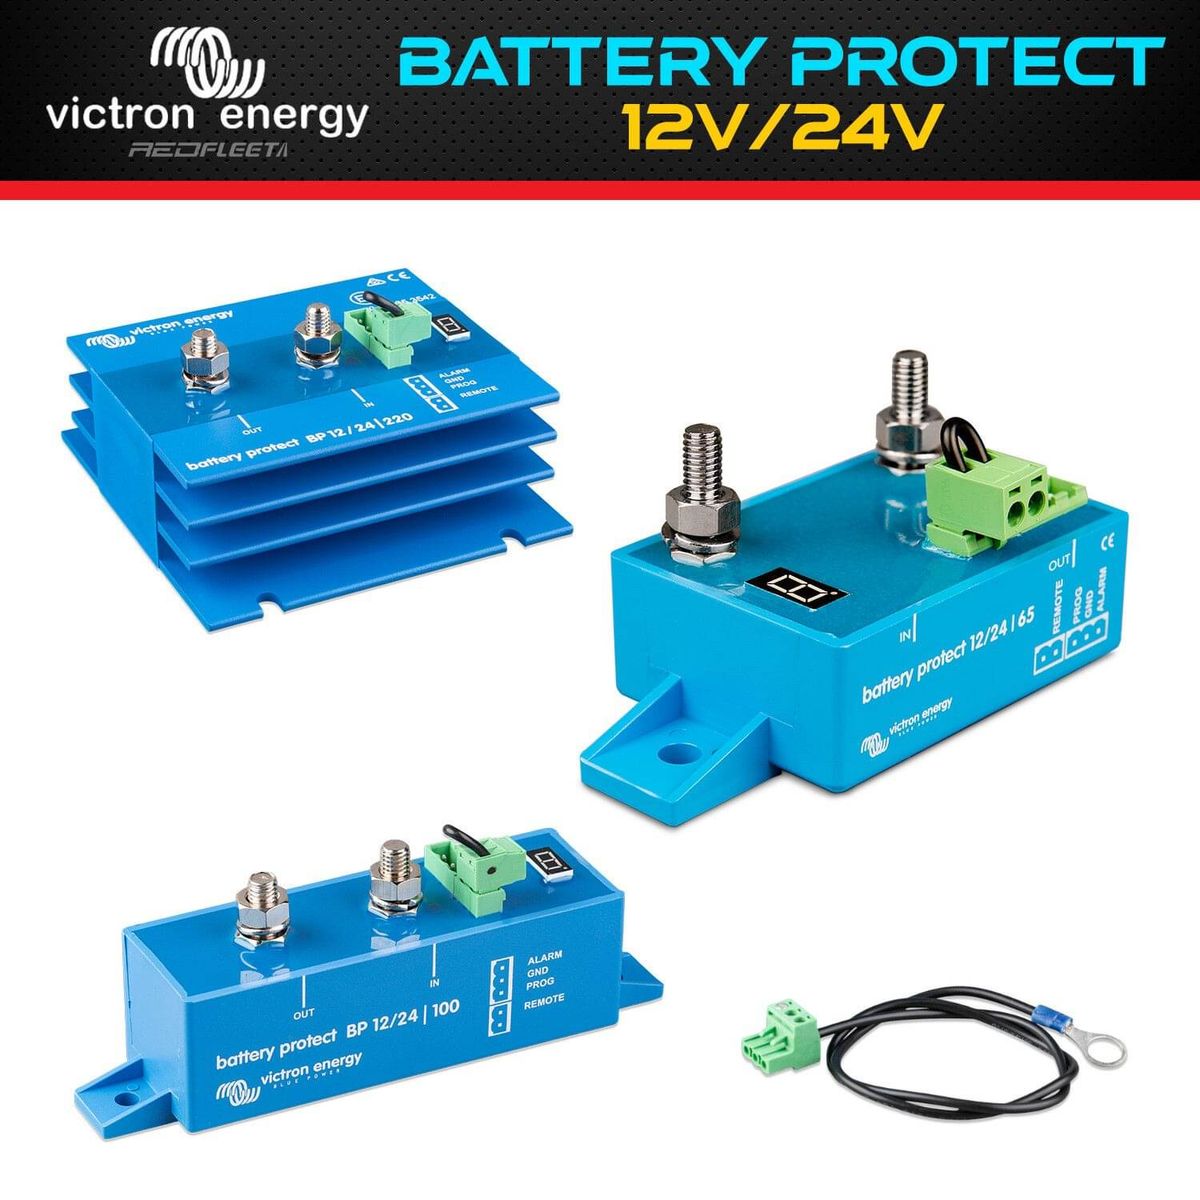 Victron Battery Protect 12/24V 65A